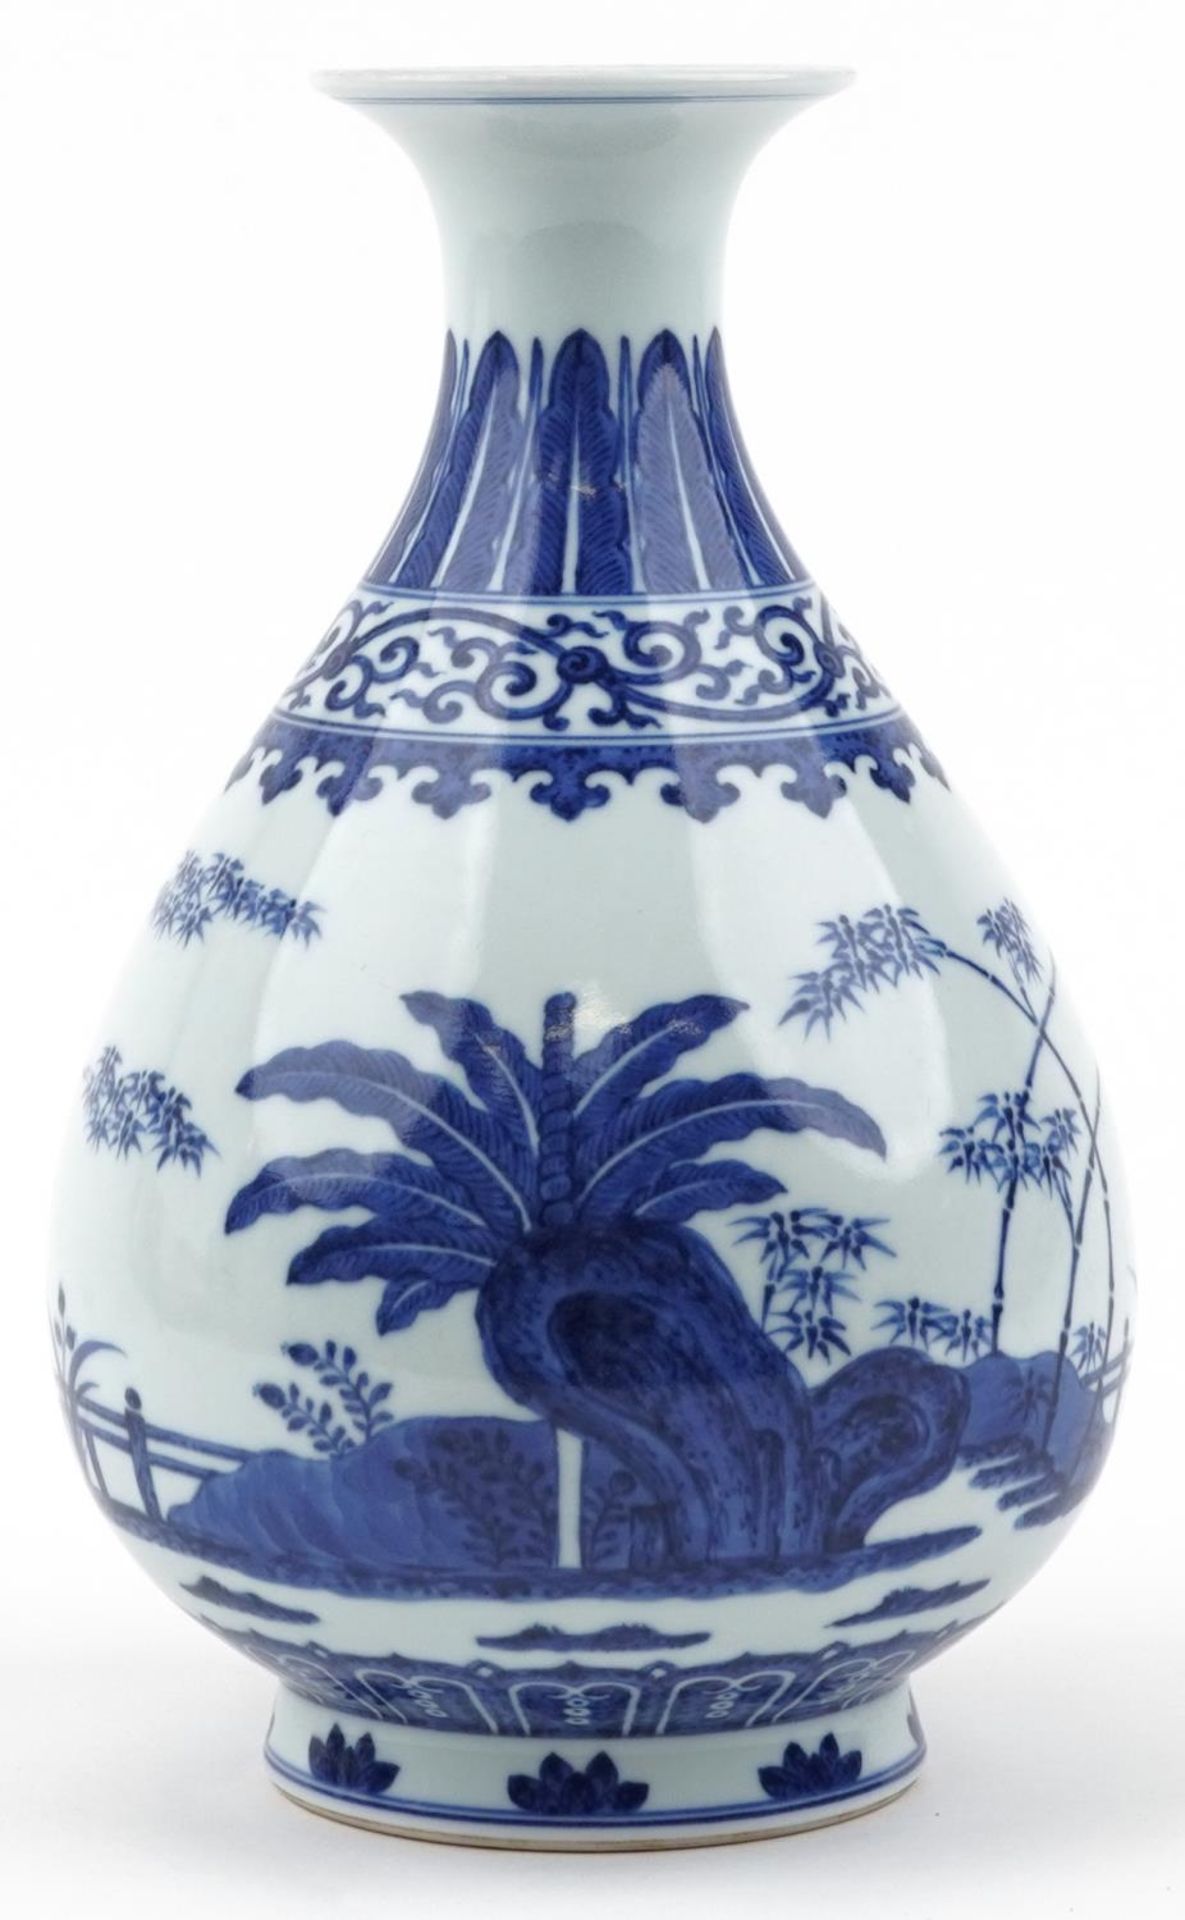 Chinese blue and white porcelain vase hand painted with a palace setting, six figure character marks - Image 3 of 6